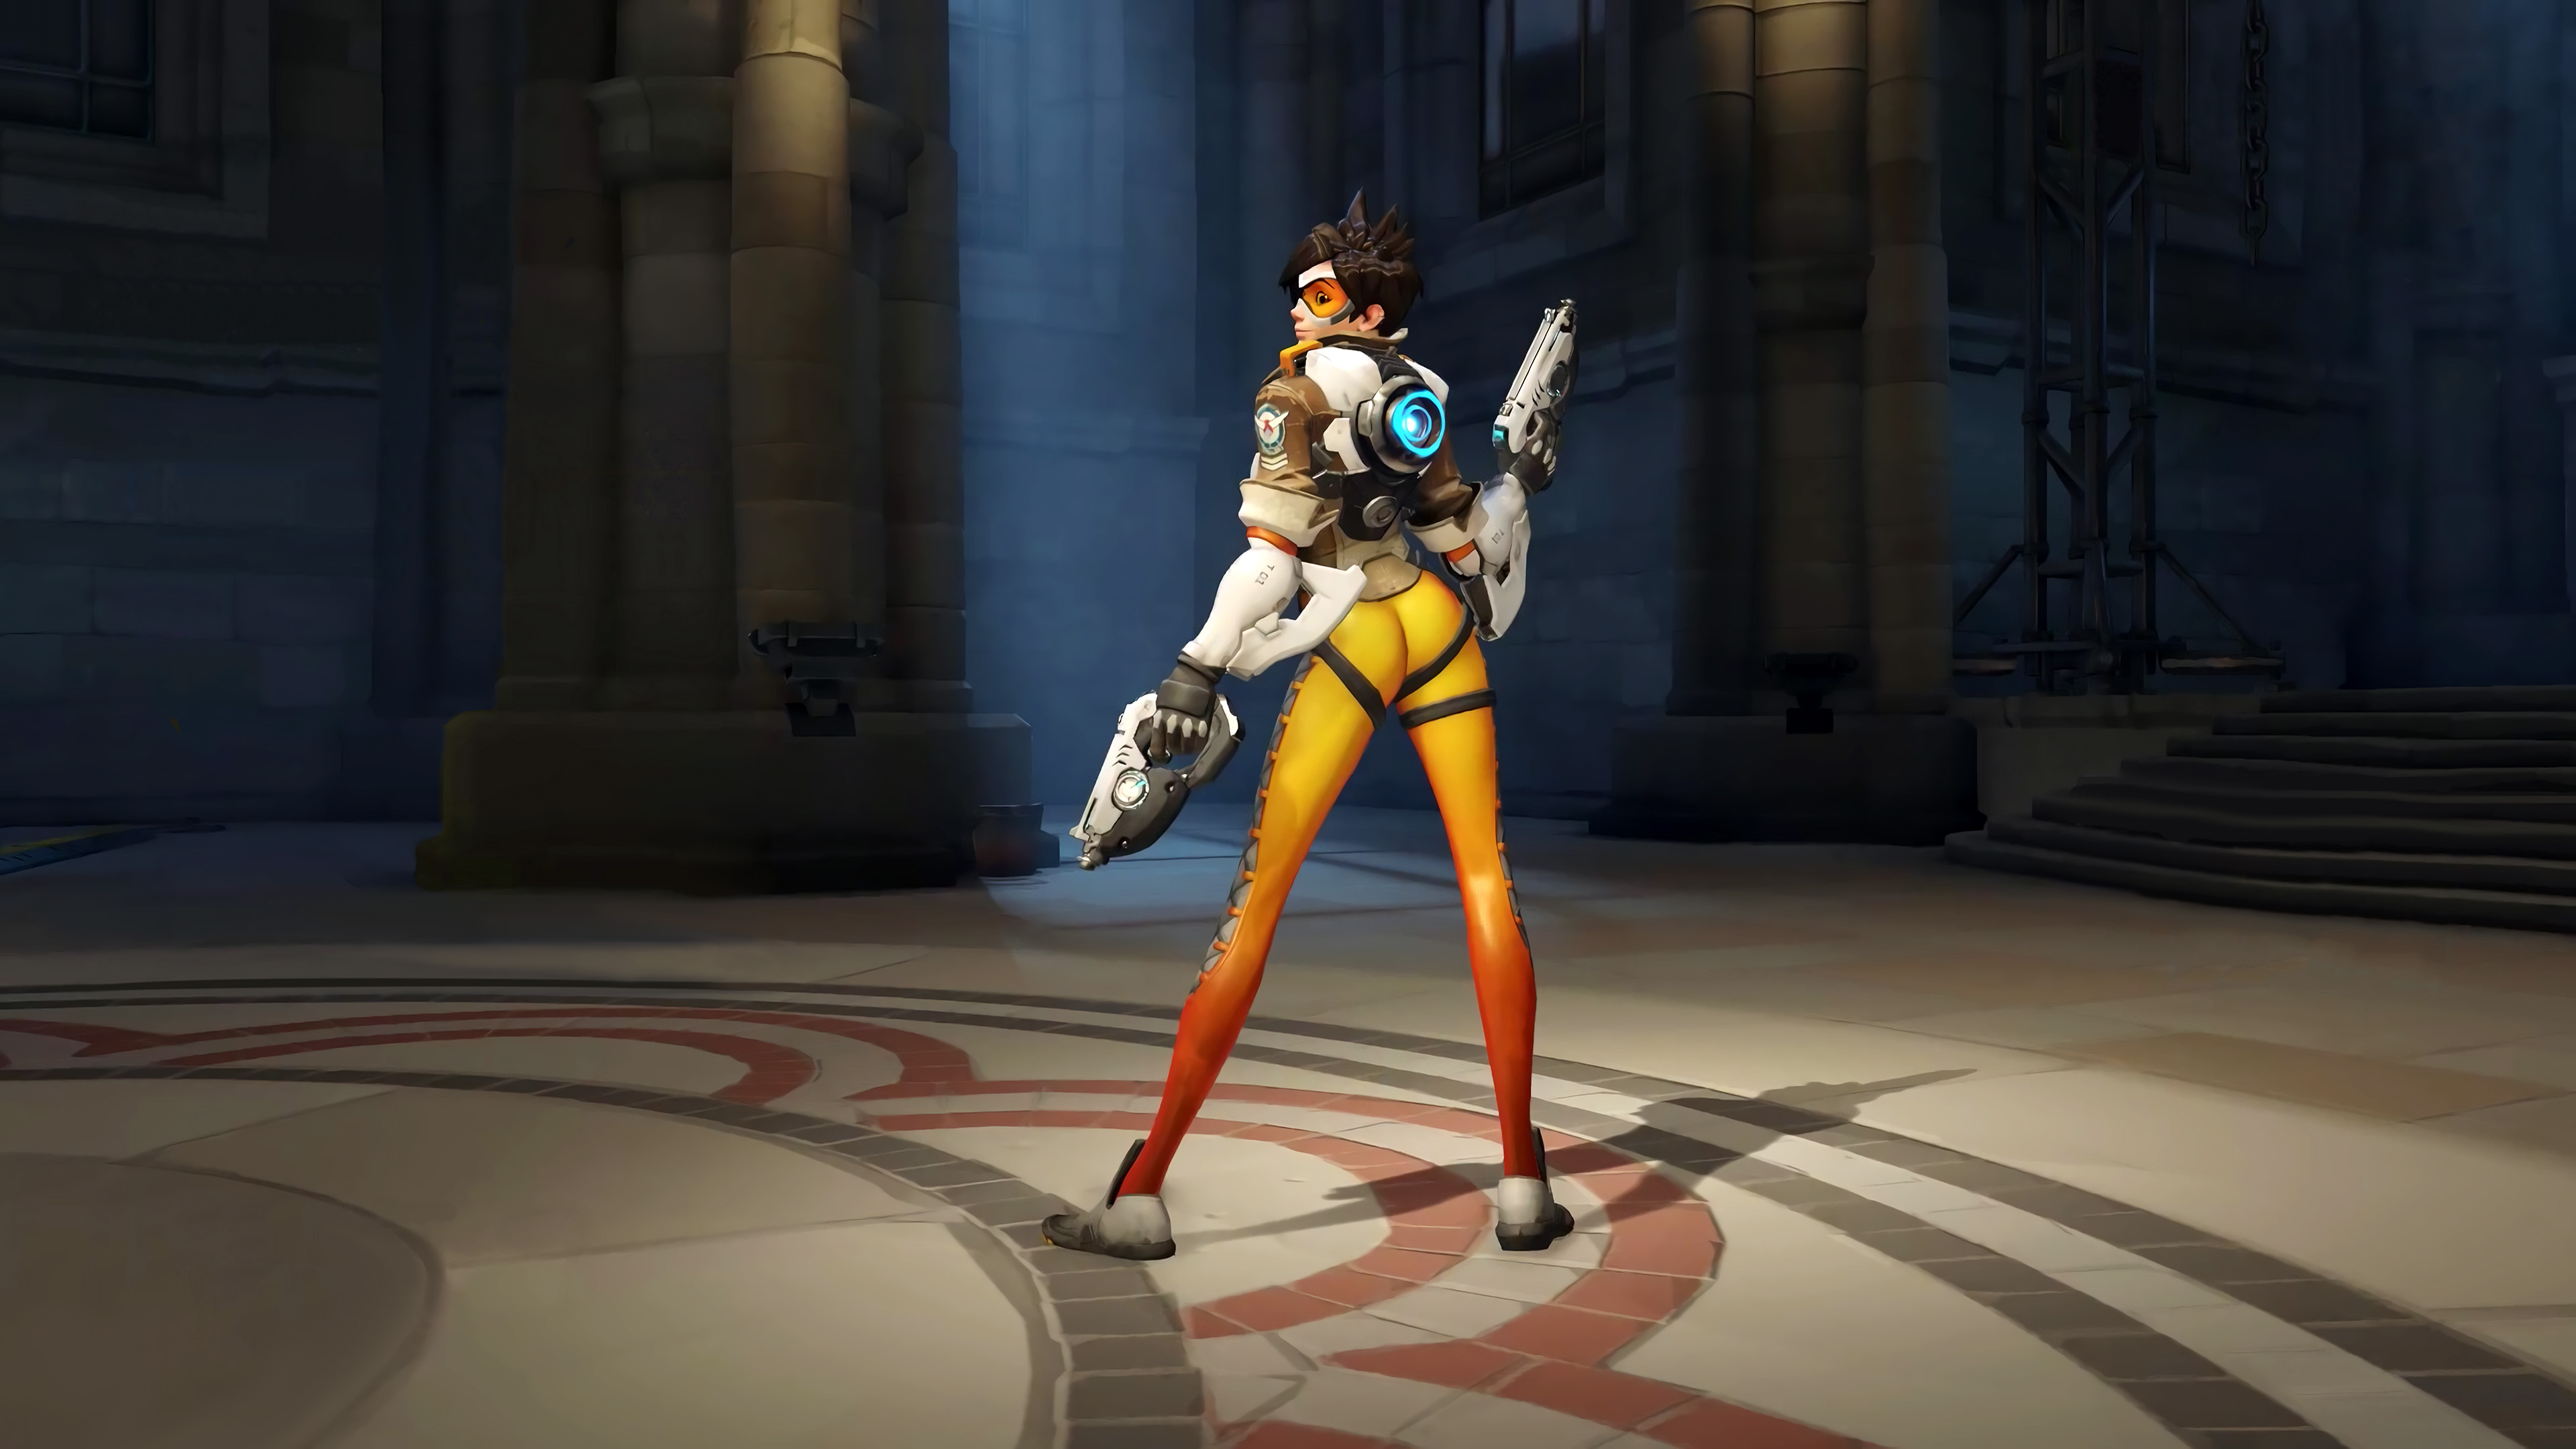 Tracer Overwatch 2016 Wallpapers HD Wallpapers